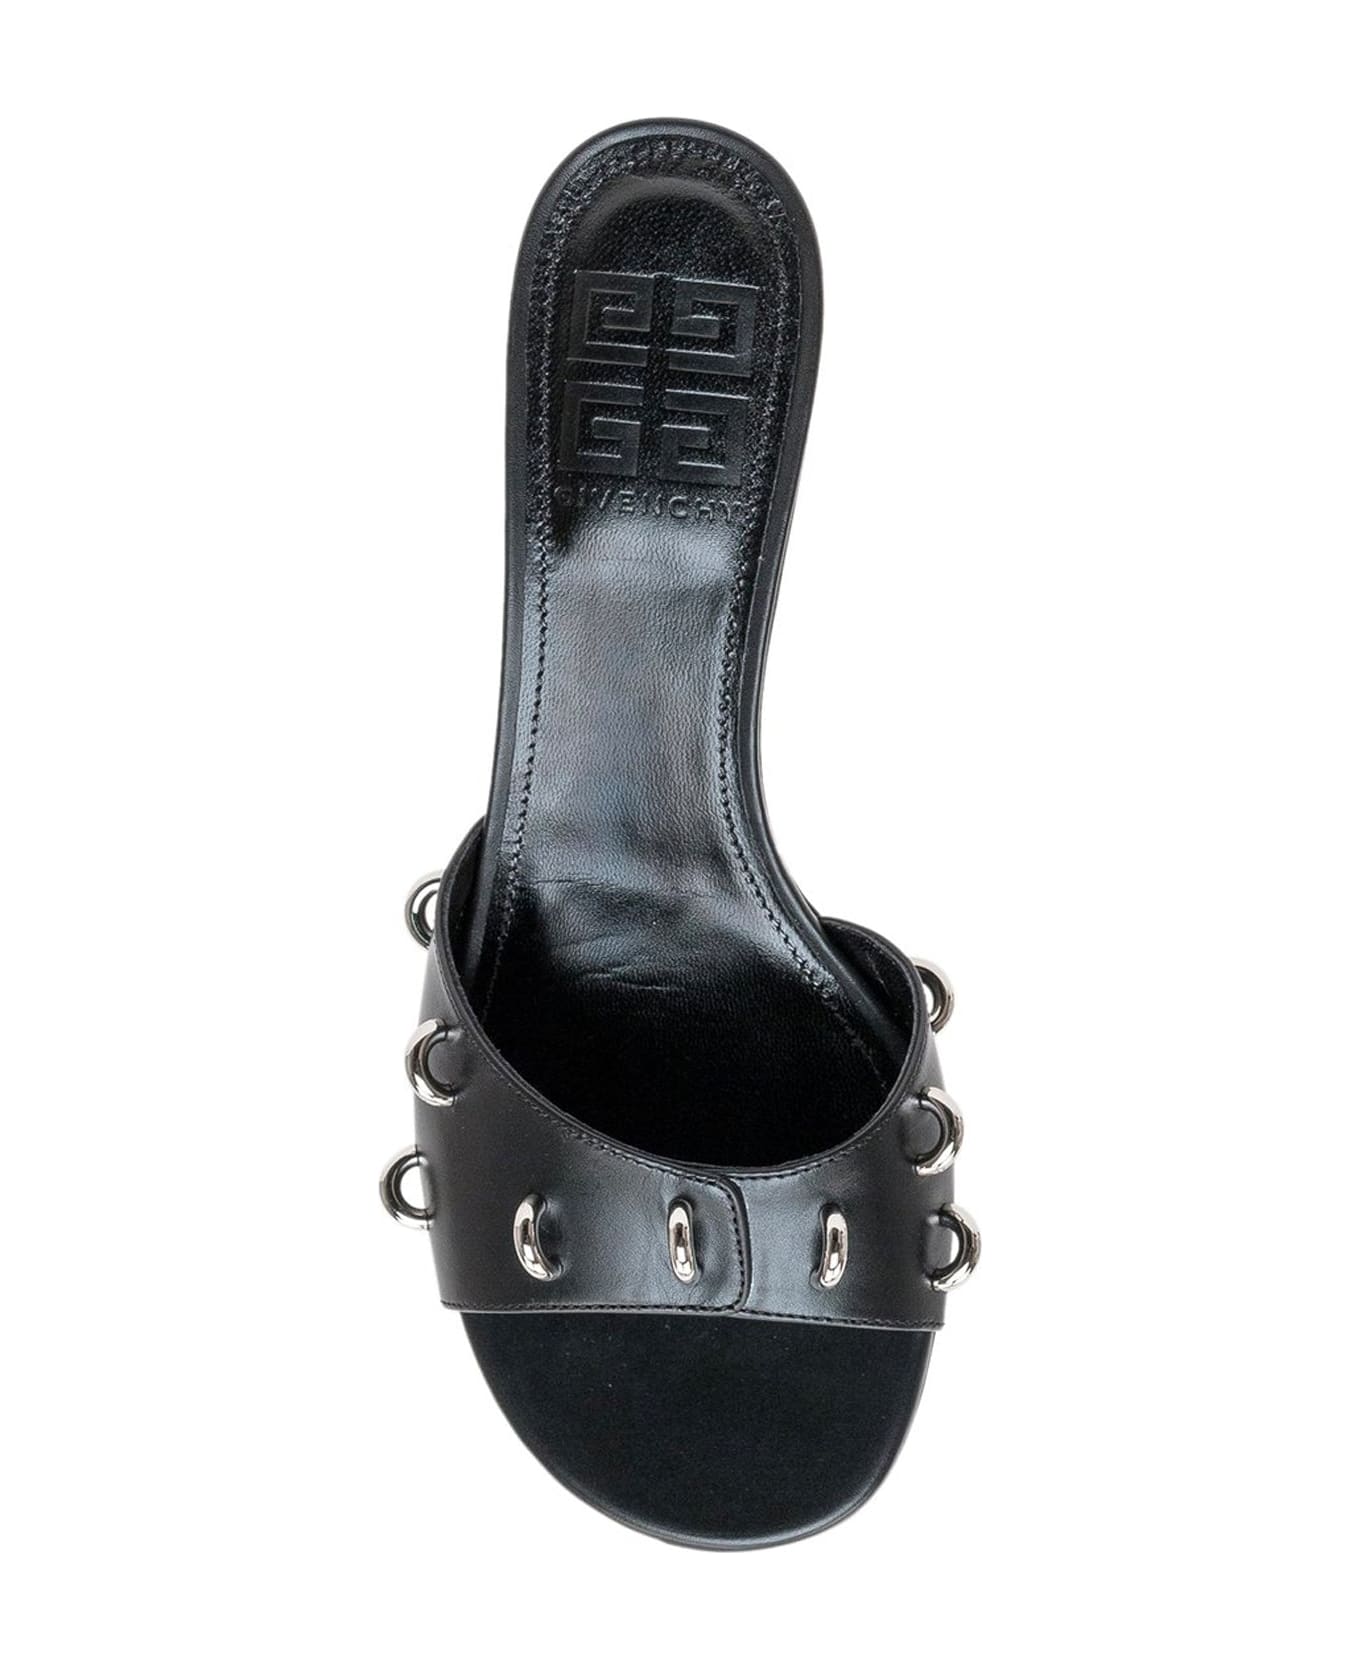 Givenchy Show Heel Mules - Black